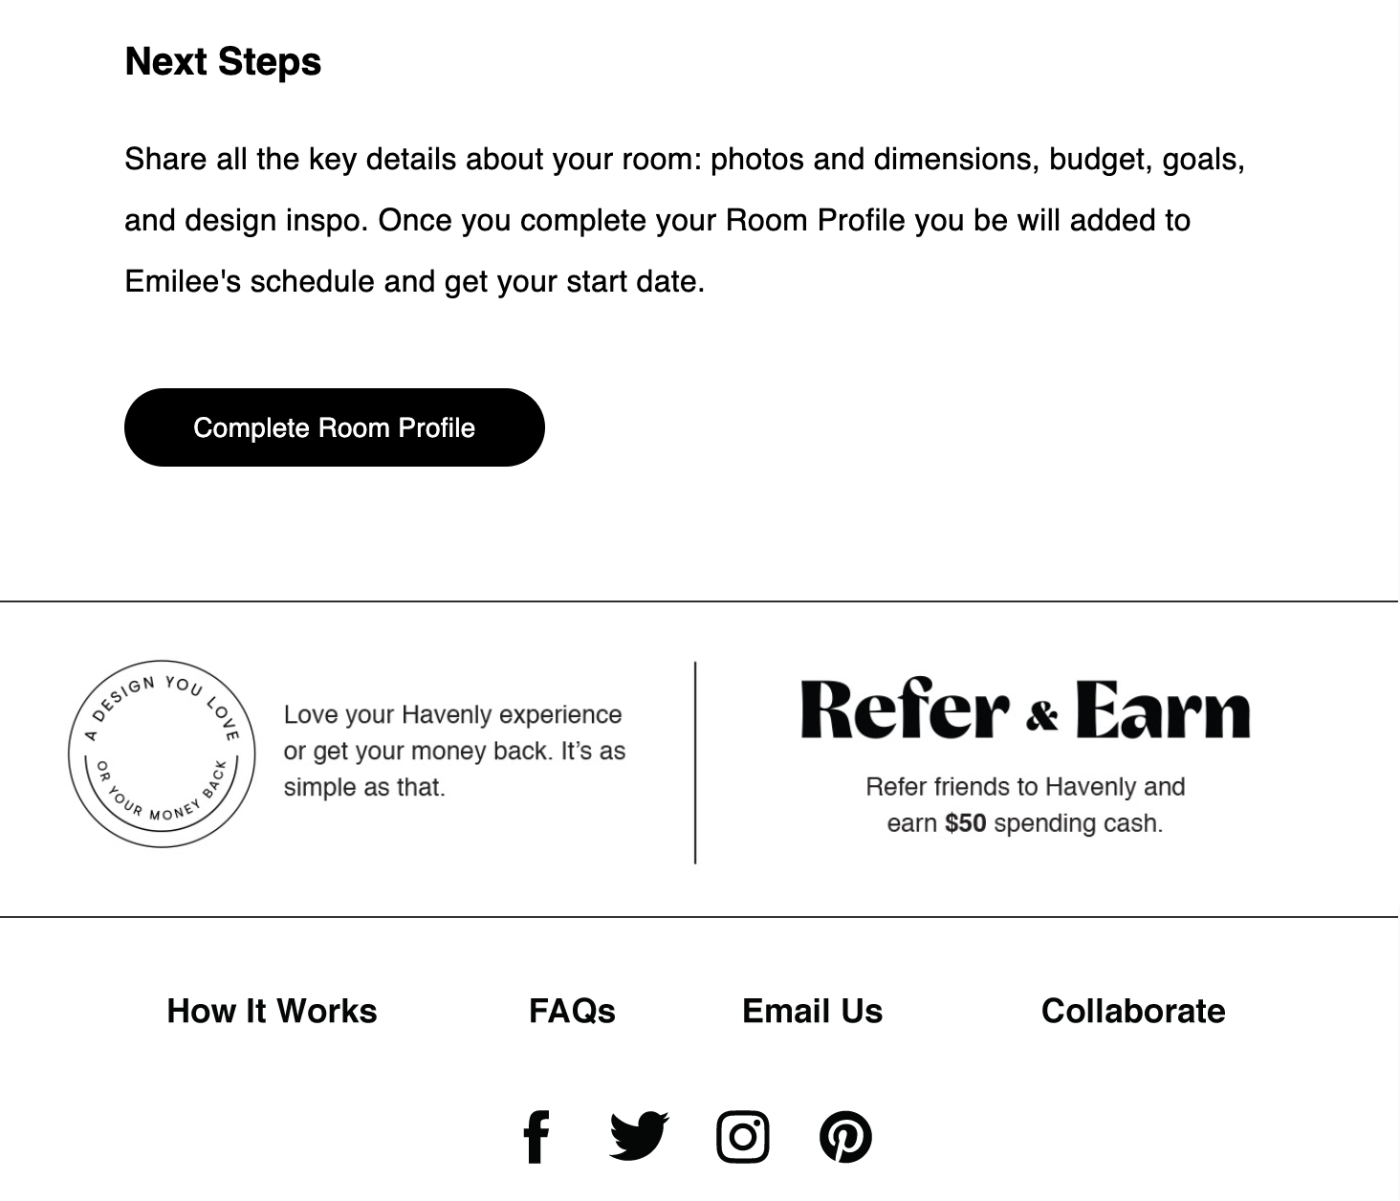 Welcome email from Havenly: Next Steps Share all the key details about your room: photos and dimensions, budget, goals, and design inspo. Once you complete your Room Profile you be will added to Emilee's schedule and get your start date.